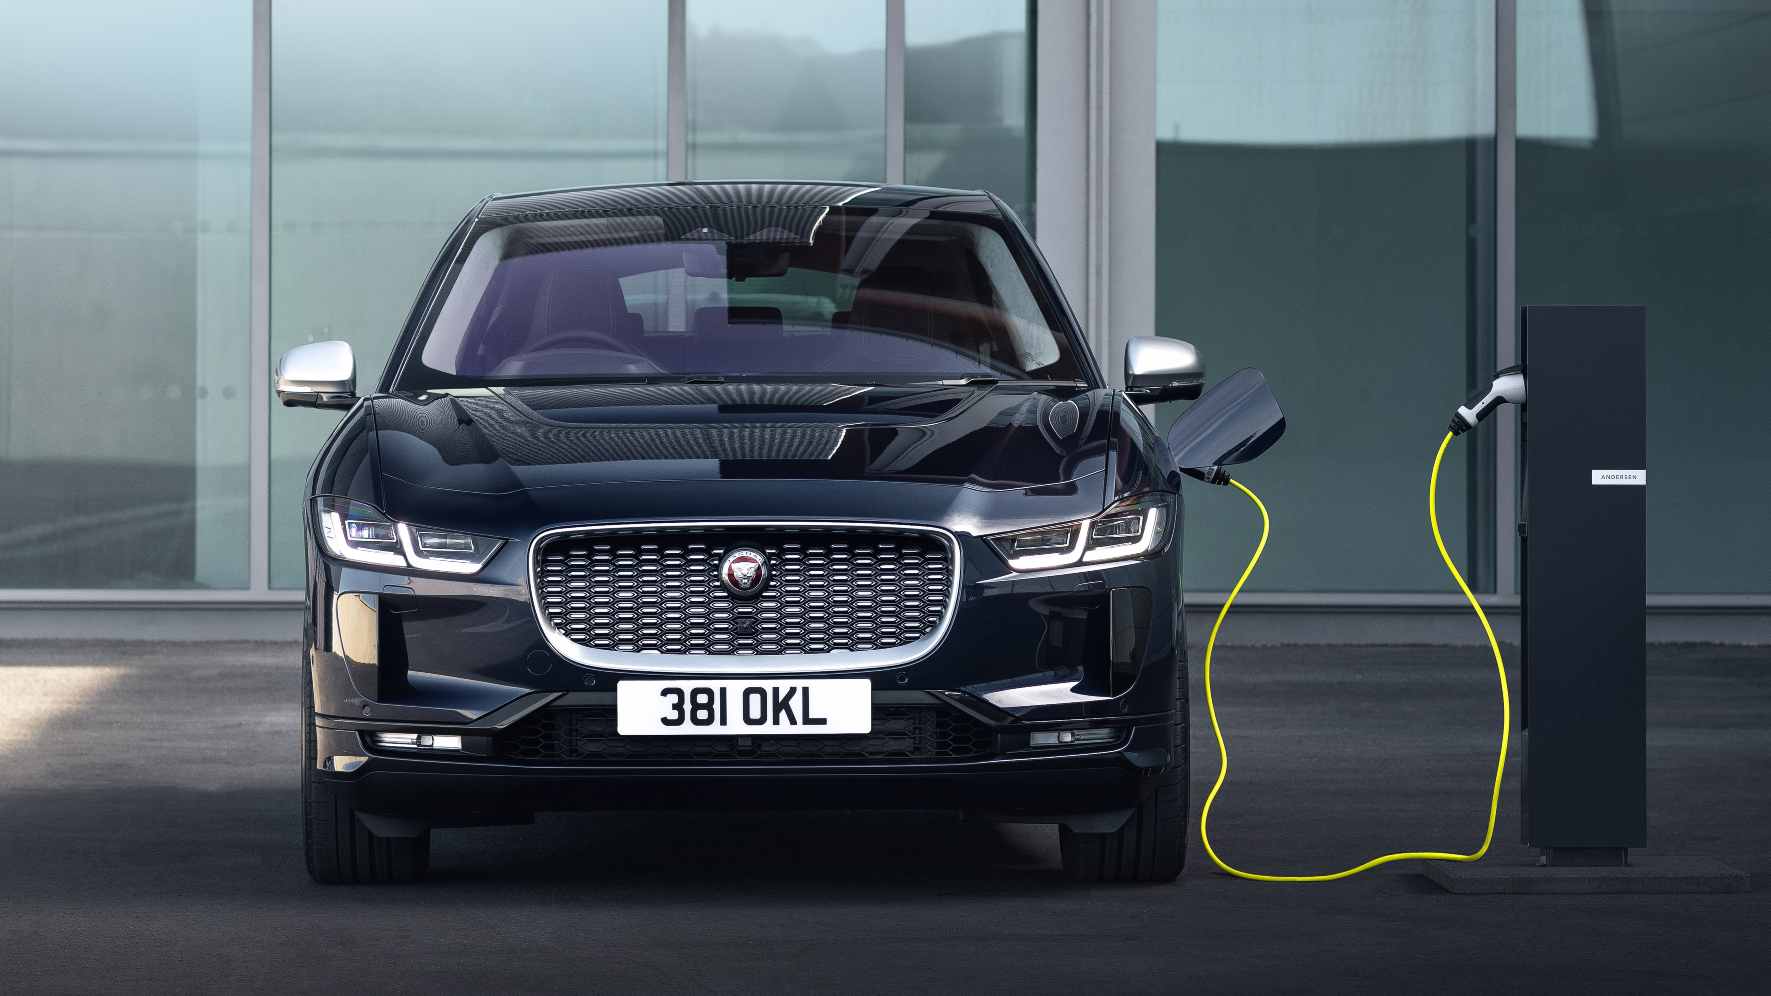 The only all-electric model in Jaguar's present-day range is the I-Pace crossover. Image: Jaguar